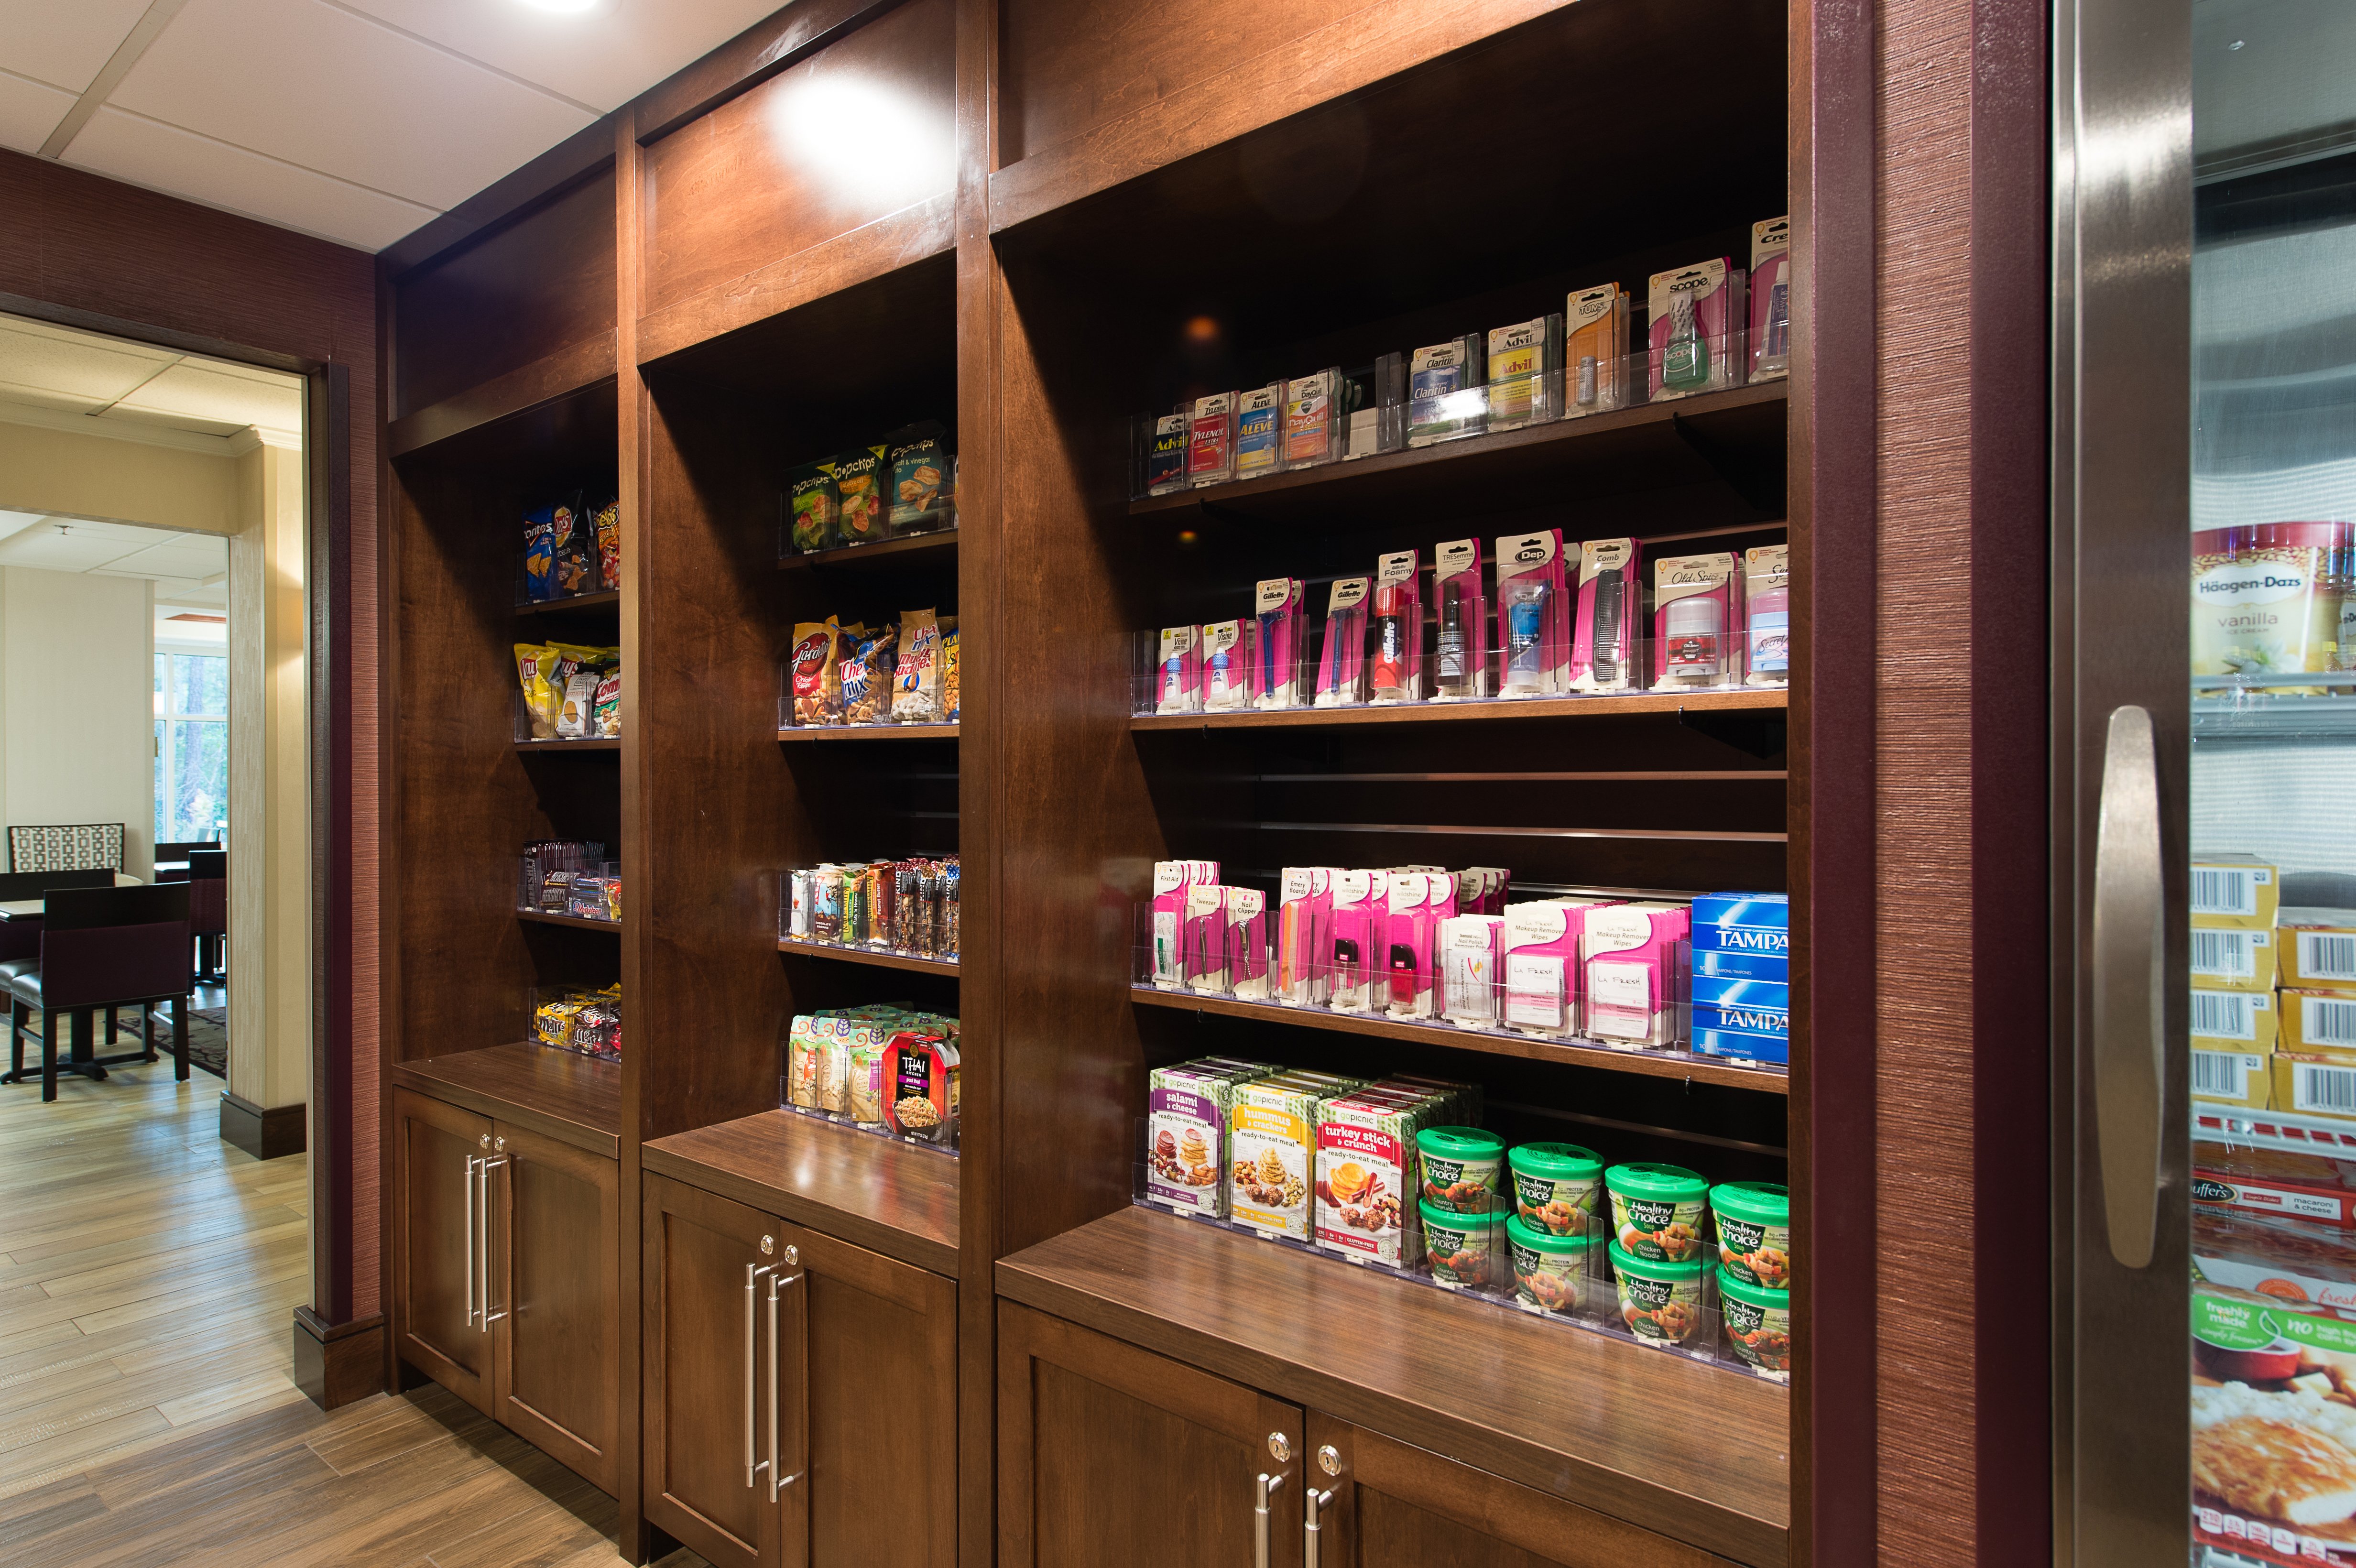 Our Suite Shop is loaded with snacks, drinks, and other items